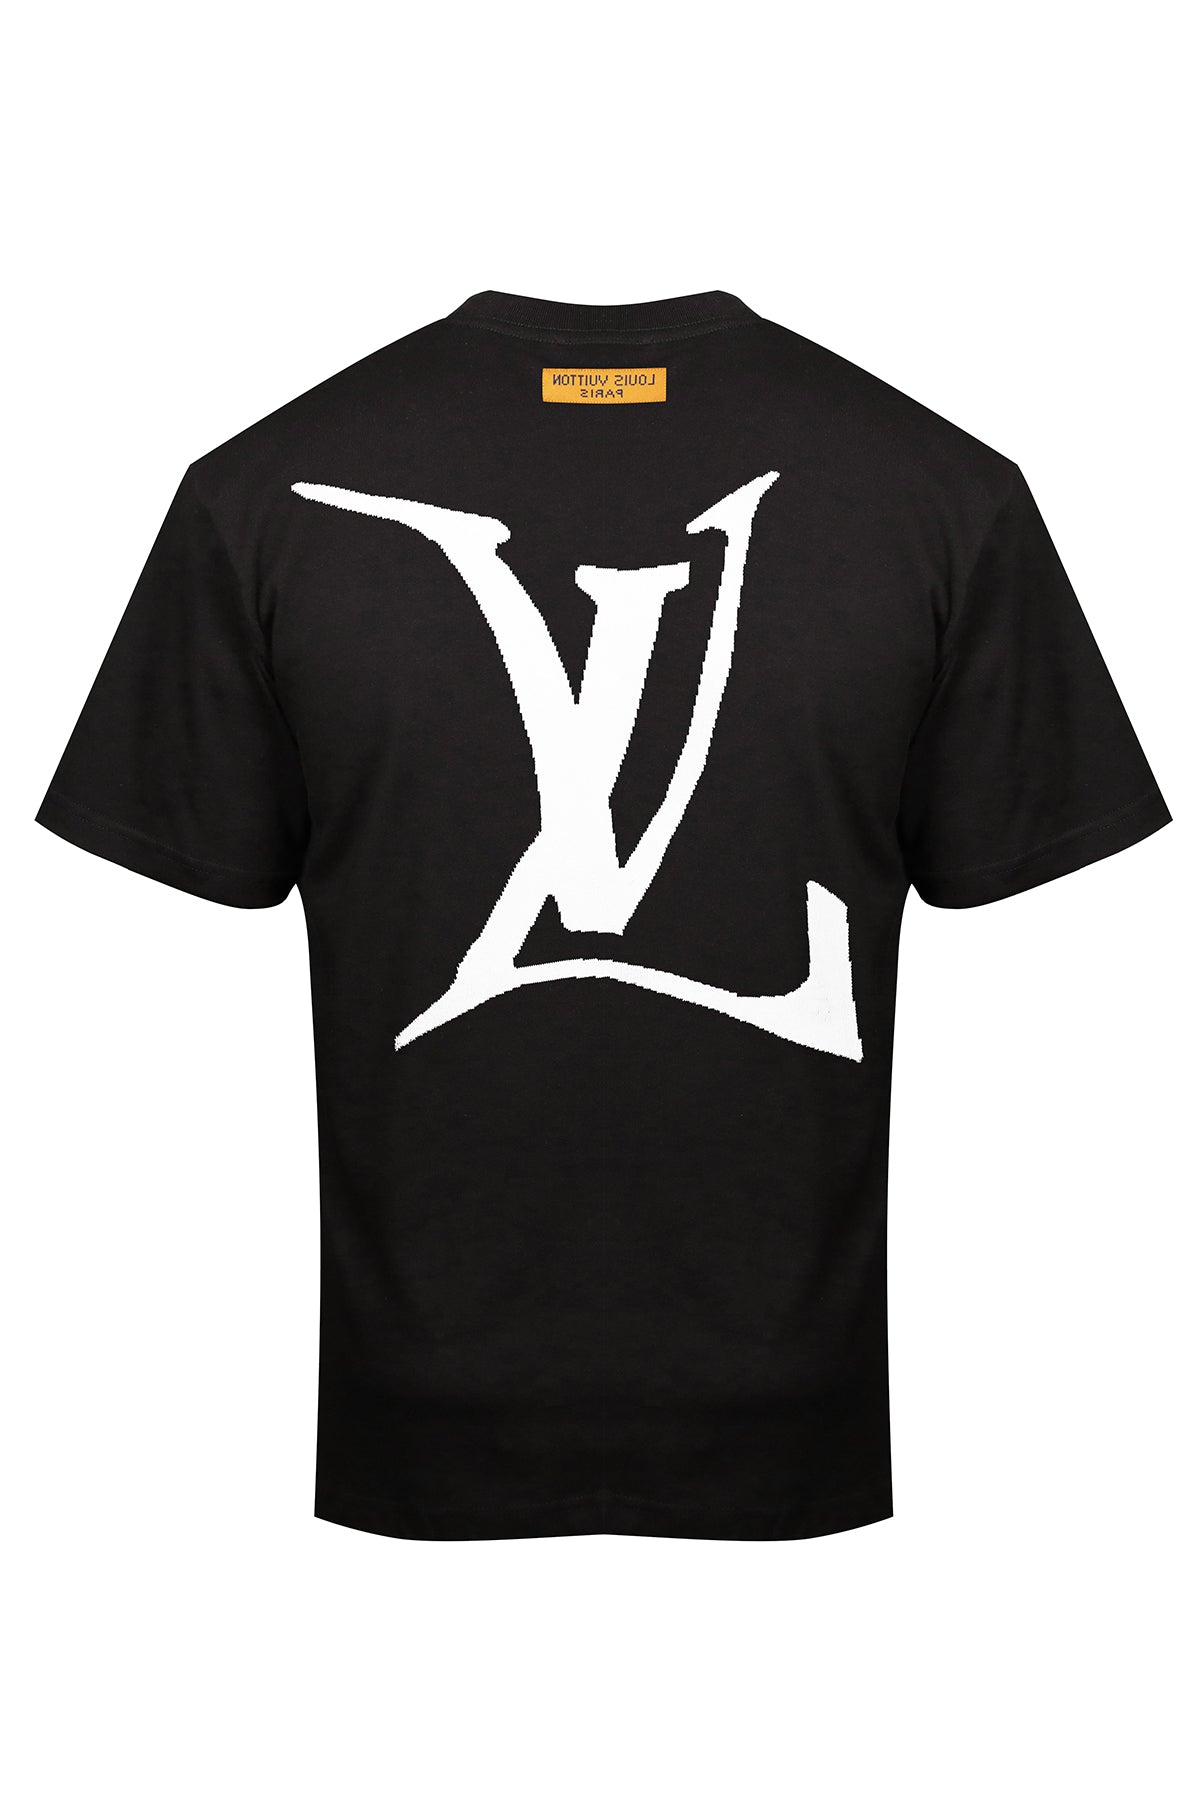 END GOAL LV T-Shirt - Store 1# High Quality UA Products